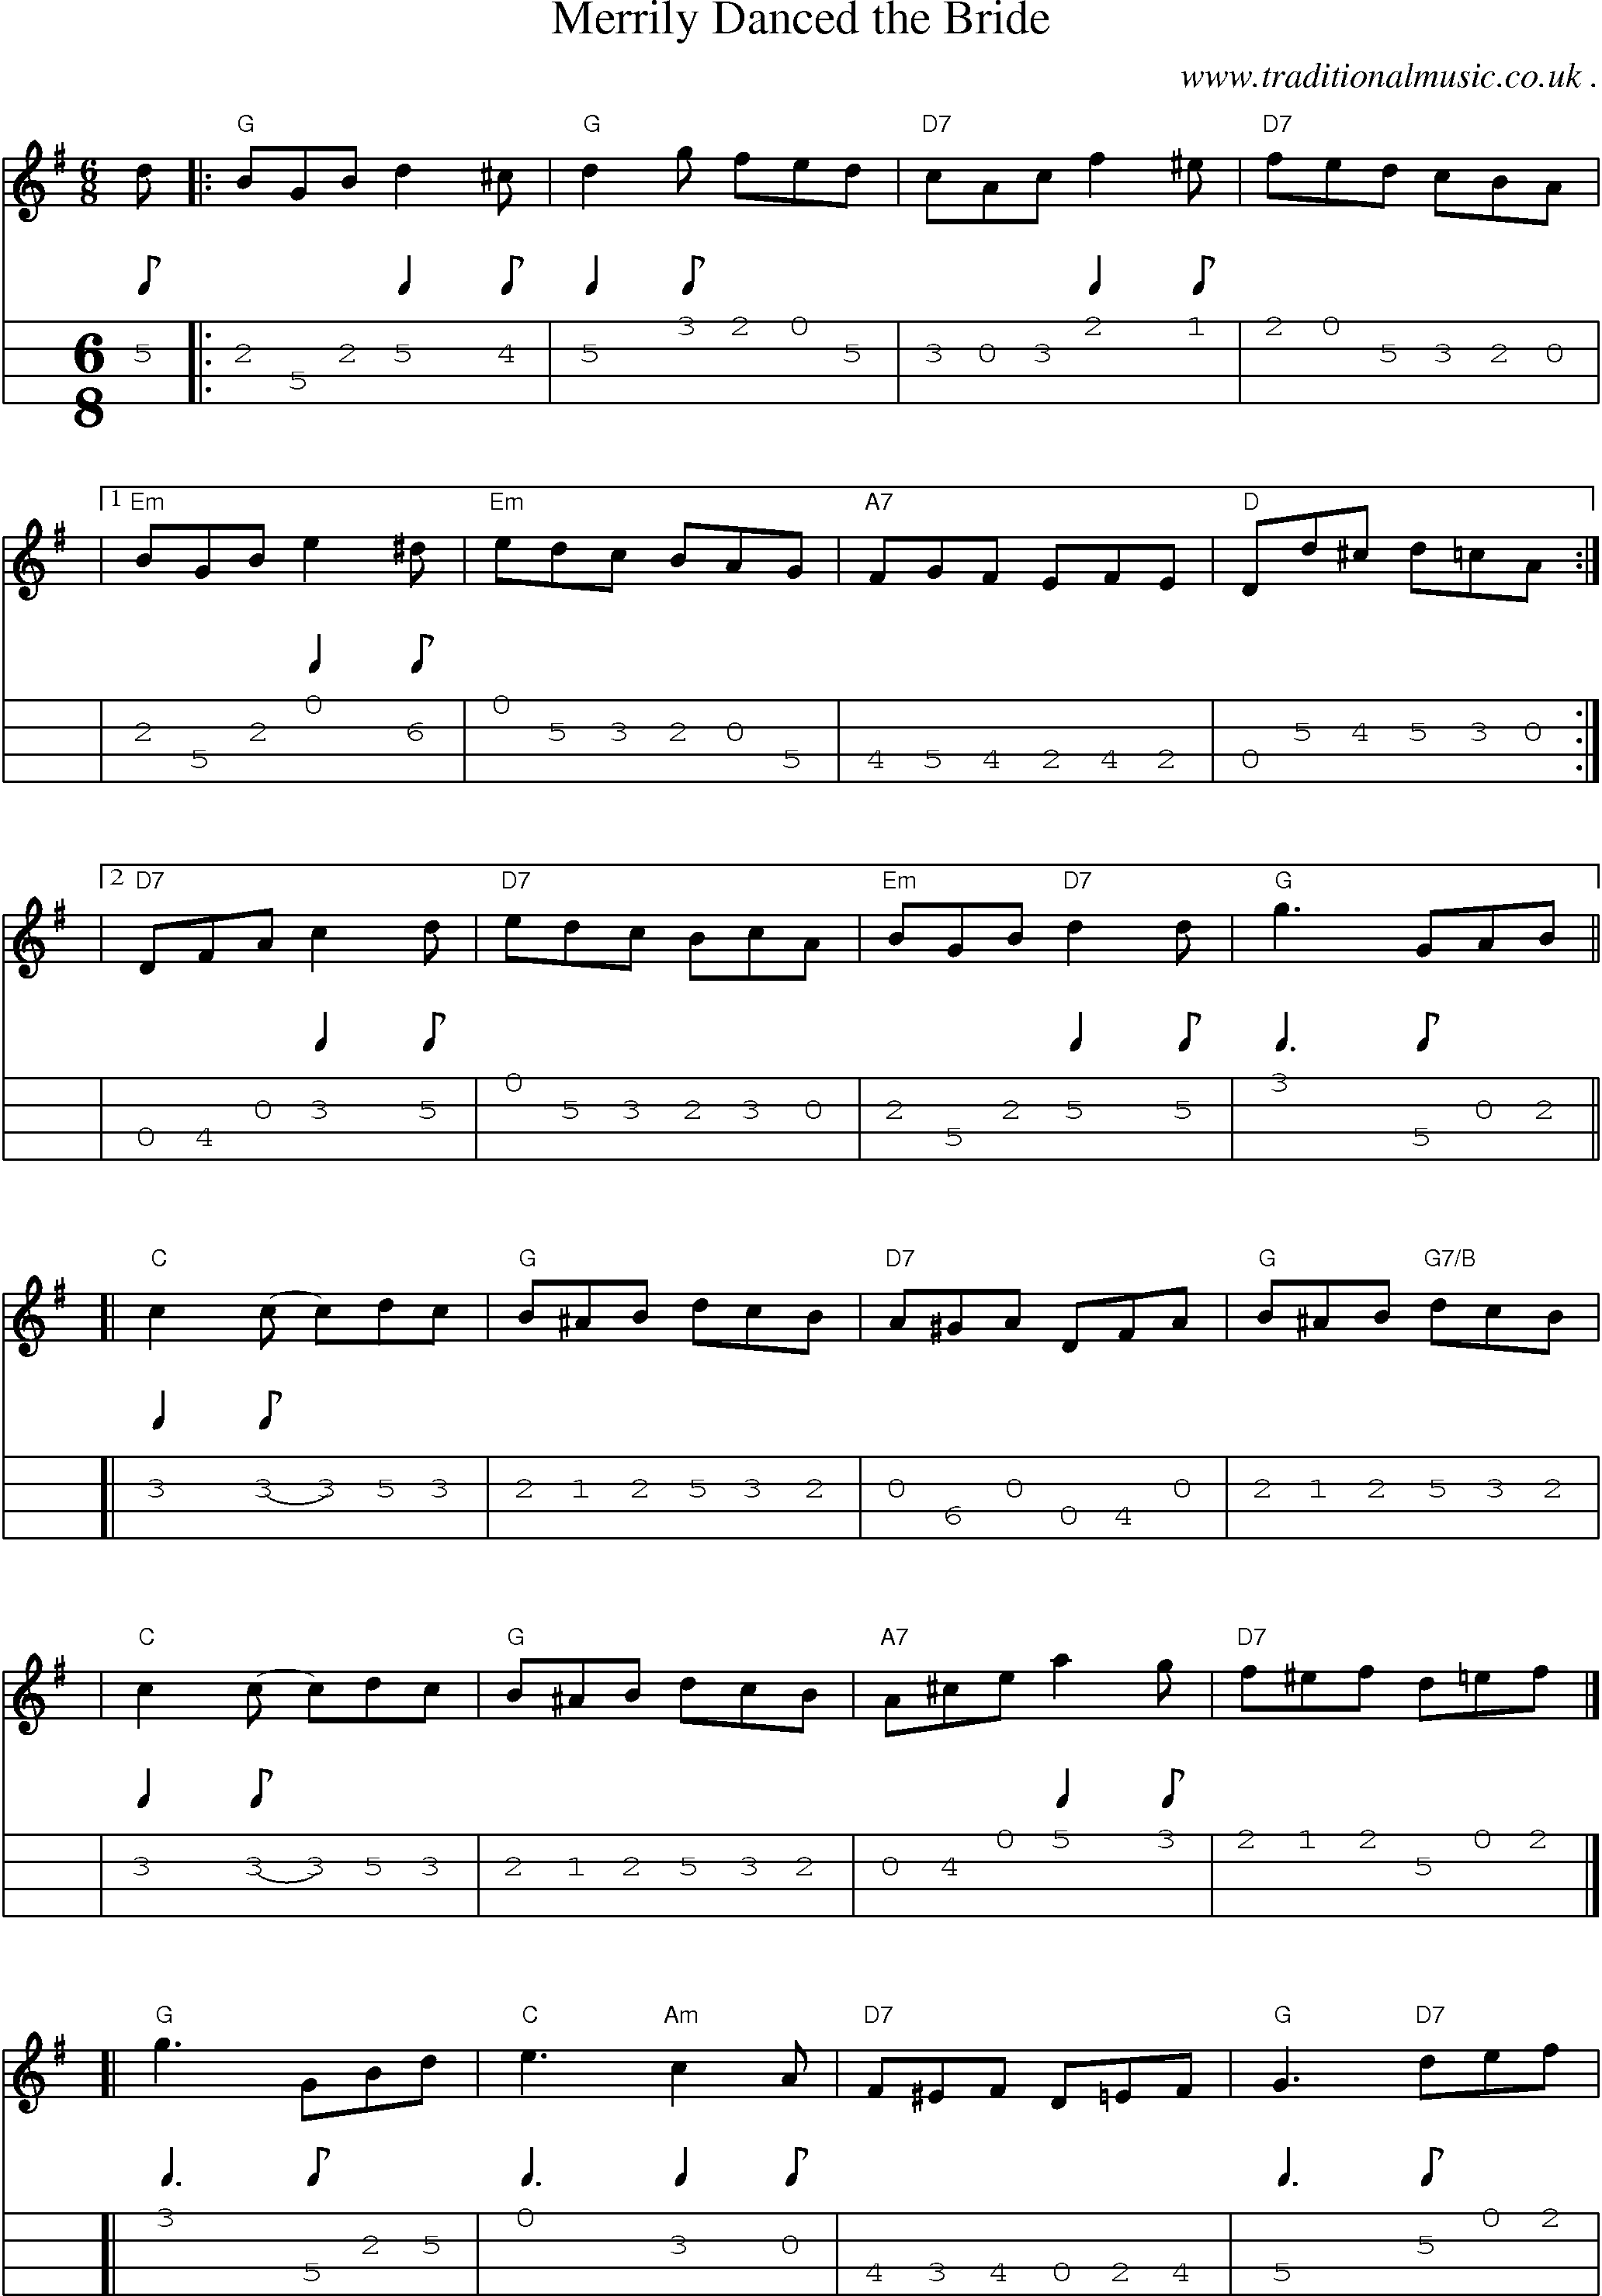 Sheet-music  score, Chords and Mandolin Tabs for Merrily Danced The Bride